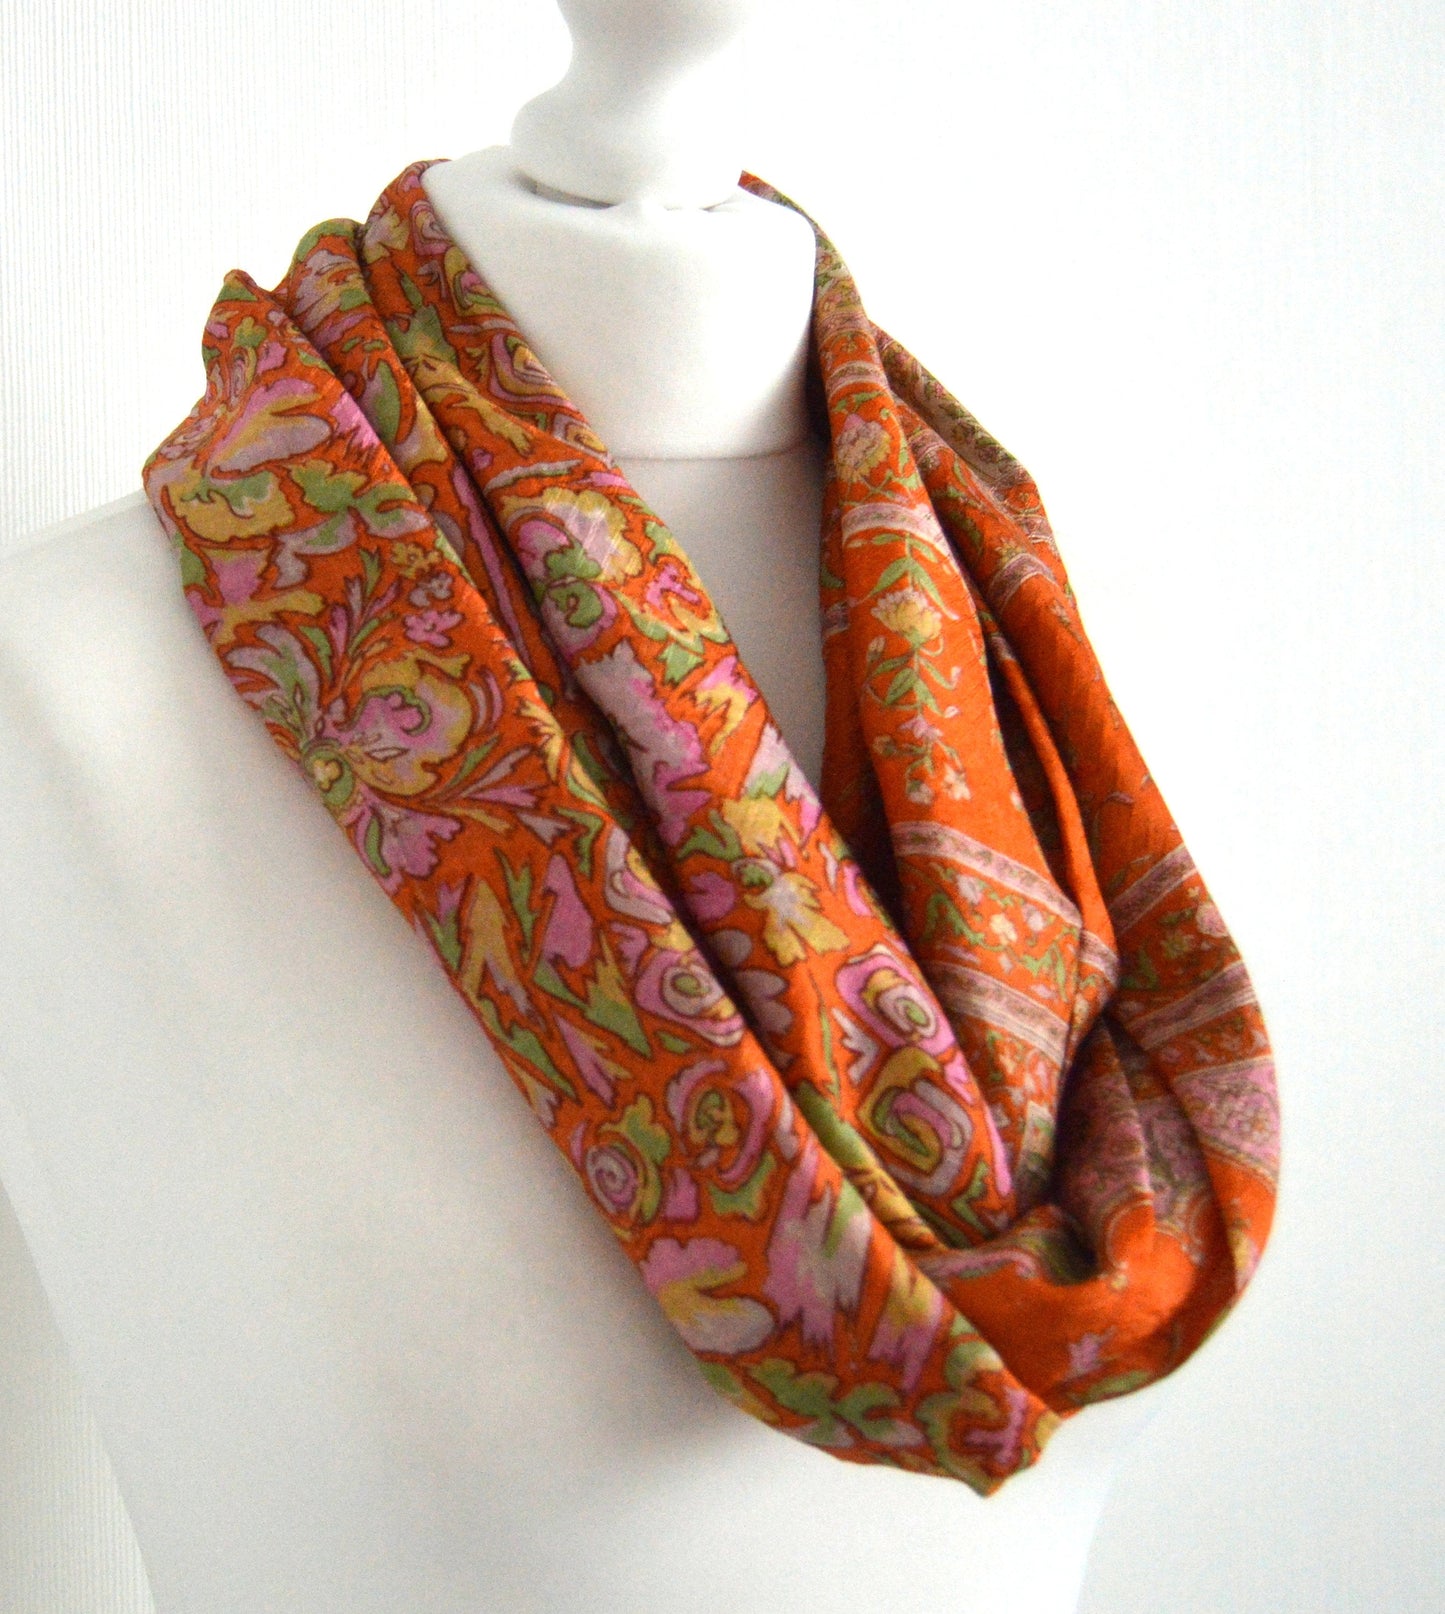 Orange Upcycled Vintage Sari Silk Scarf - Bohemian Autumn Fall Winter Womens Scarf - Eco Friendly Christmas Gift For Her Mum Mom Sister